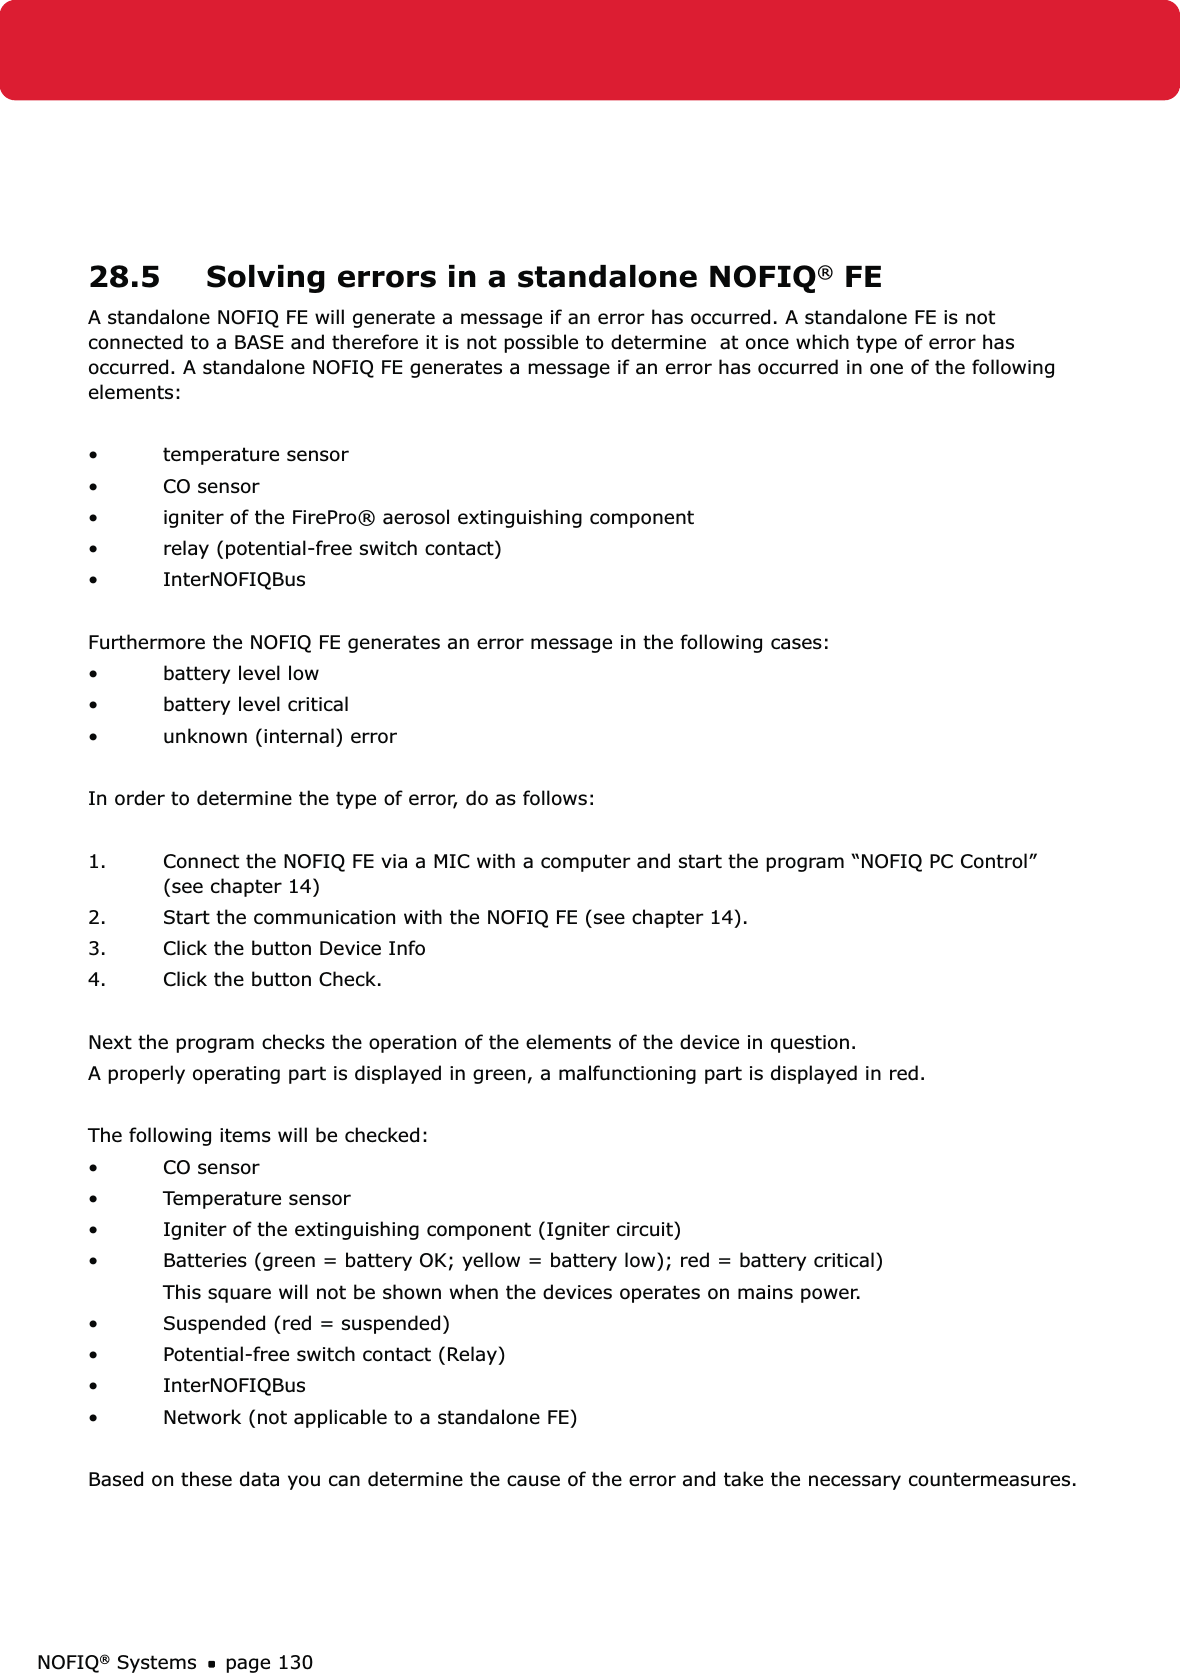 NOFIQ® Systems page 13028.5  Solving errors in a standalone NOFIQ® FEA standalone NOFIQ FE will generate a message if an error has occurred. A standalone FE is not connected to a BASE and therefore it is not possible to determine  at once which type of error has occurred. A standalone NOFIQ FE generates a message if an error has occurred in one of the following elements:• temperature sensor• CO sensor•  igniter of the FirePro® aerosol extinguishing component•  relay (potential-free switch contact)• InterNOFIQBusFurthermore the NOFIQ FE generates an error message in the following cases:•  battery level low•  battery level critical•  unknown (internal) errorIn order to determine the type of error, do as follows:1.  Connect the NOFIQ FE via a MIC with a computer and start the program “NOFIQ PC Control”    (see chapter 14)2.  Start the communication with the NOFIQ FE (see chapter 14).3.  Click the button Device Info4.  Click the button Check.Next the program checks the operation of the elements of the device in question. A properly operating part is displayed in green, a malfunctioning part is displayed in red.The following items will be checked:• CO sensor• Temperature sensor•  Igniter of the extinguishing component (Igniter circuit)•  Batteries (green = battery OK; yellow = battery low); red = battery critical)  This square will not be shown when the devices operates on mains power.•  Suspended (red = suspended)•  Potential-free switch contact (Relay)• InterNOFIQBus•  Network (not applicable to a standalone FE)Based on these data you can determine the cause of the error and take the necessary countermeasures. 